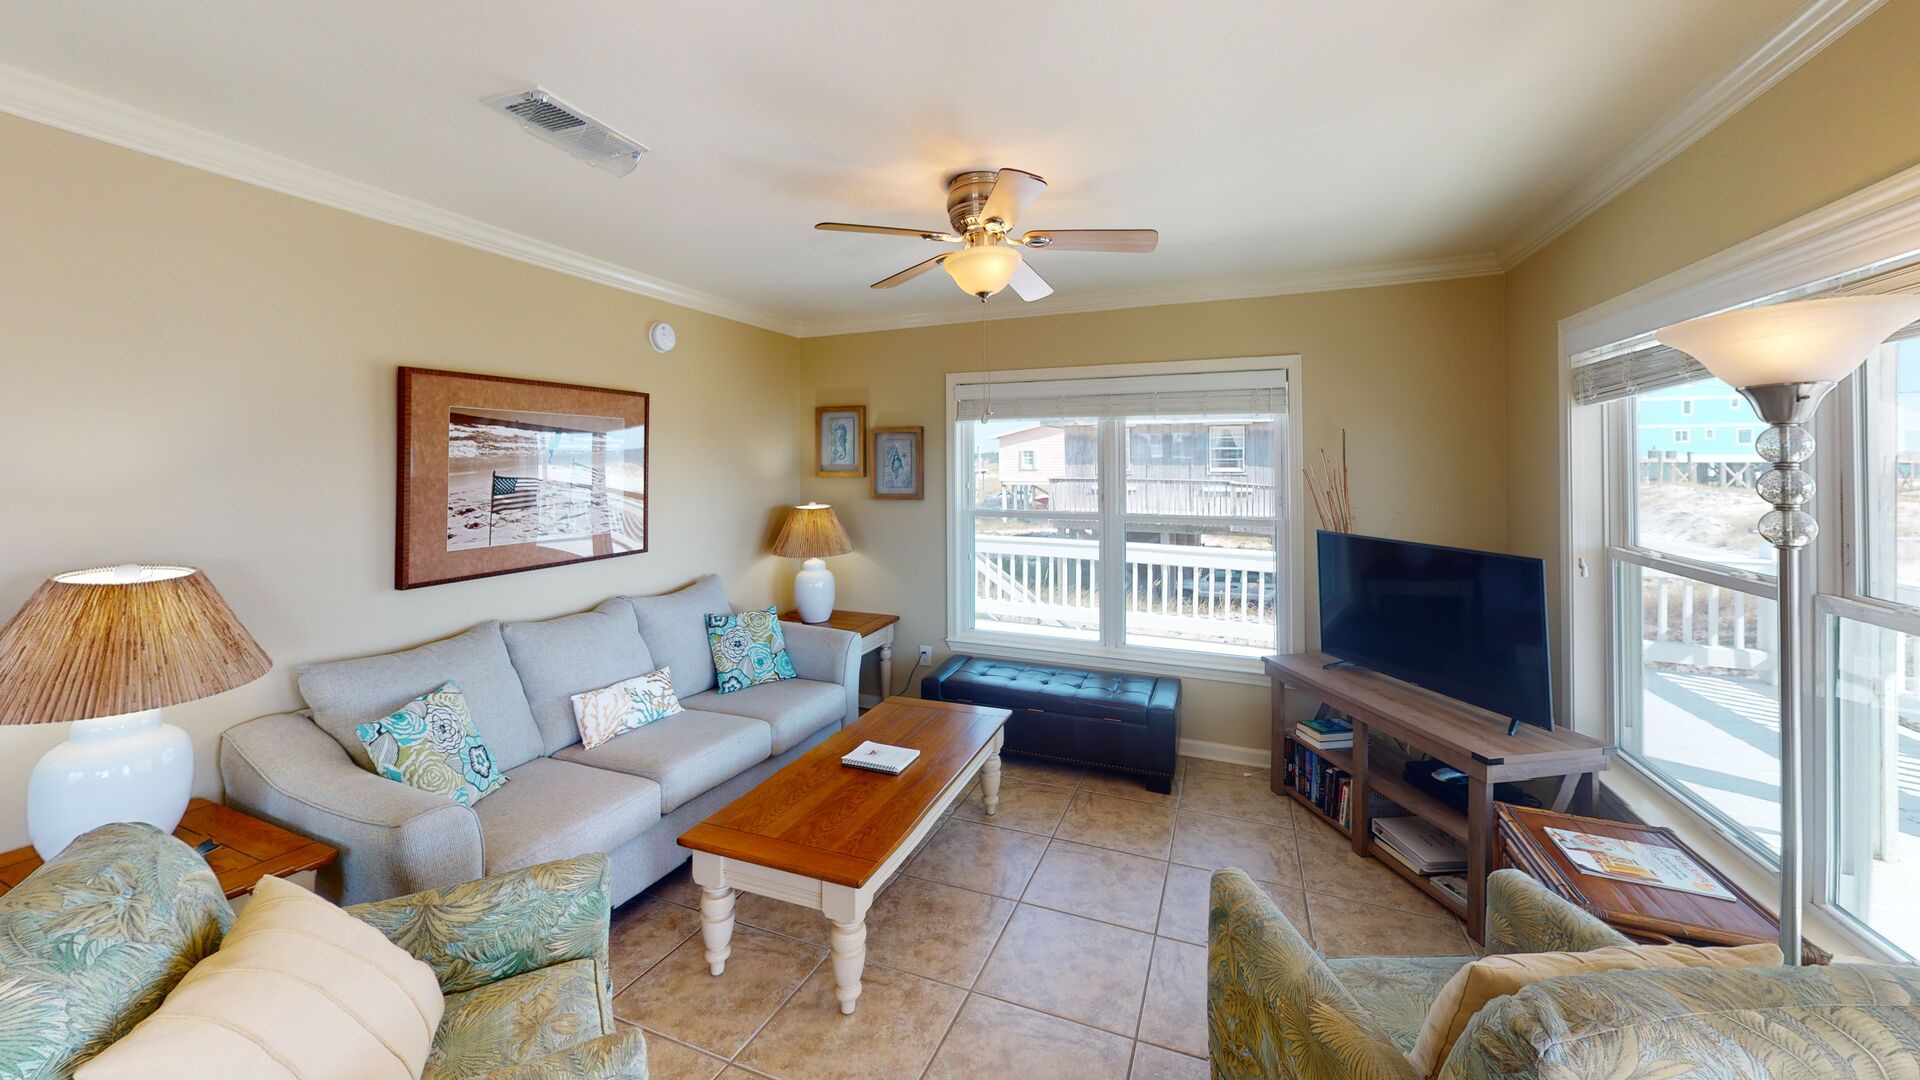 Plenty of seating in the comfortable living area and unobstructed views of the beach and sparkling Gulf!